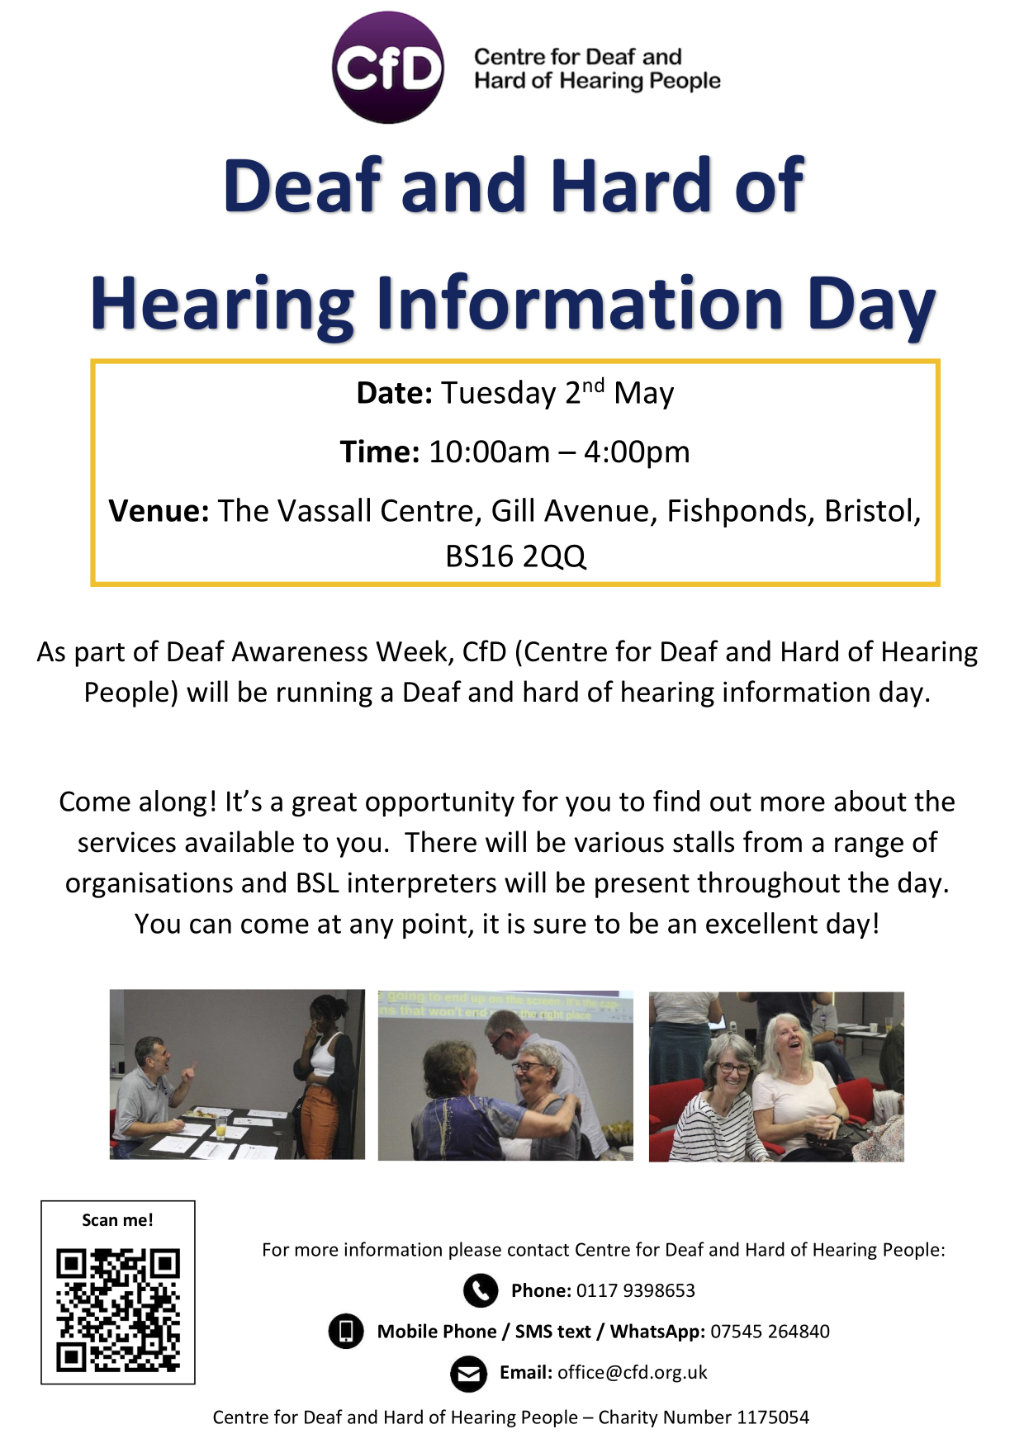 Deaf and hard of hearing information day poster